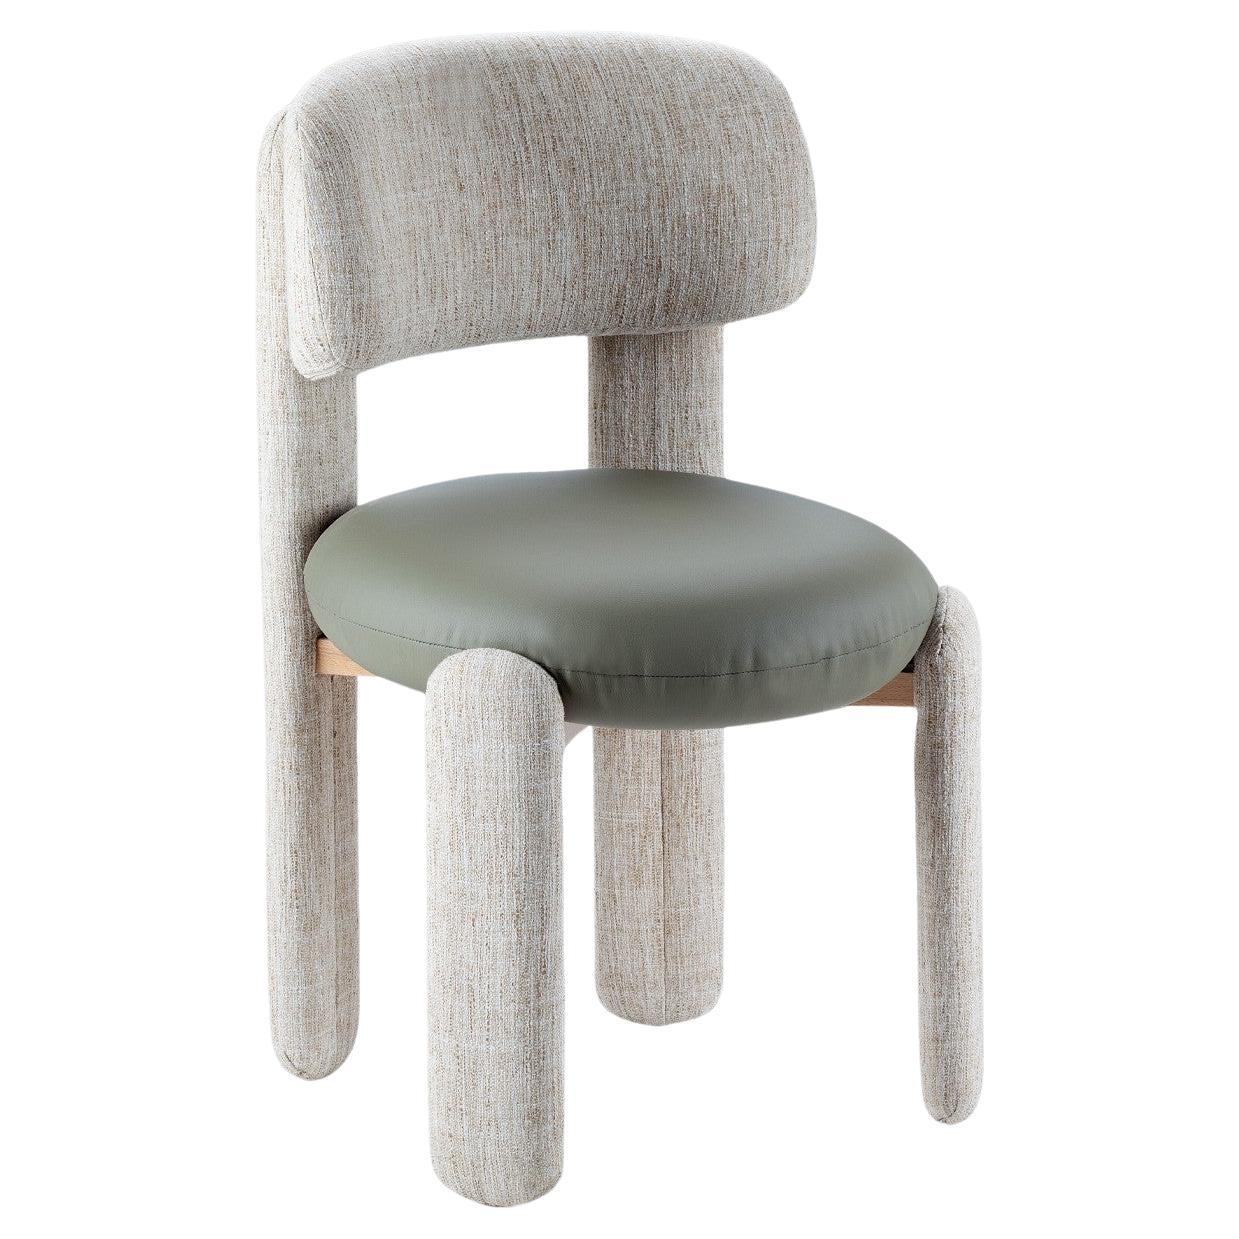 Handmade Contemporary Mambo Unlimited Ideas Choux khaki seat Chair For Sale